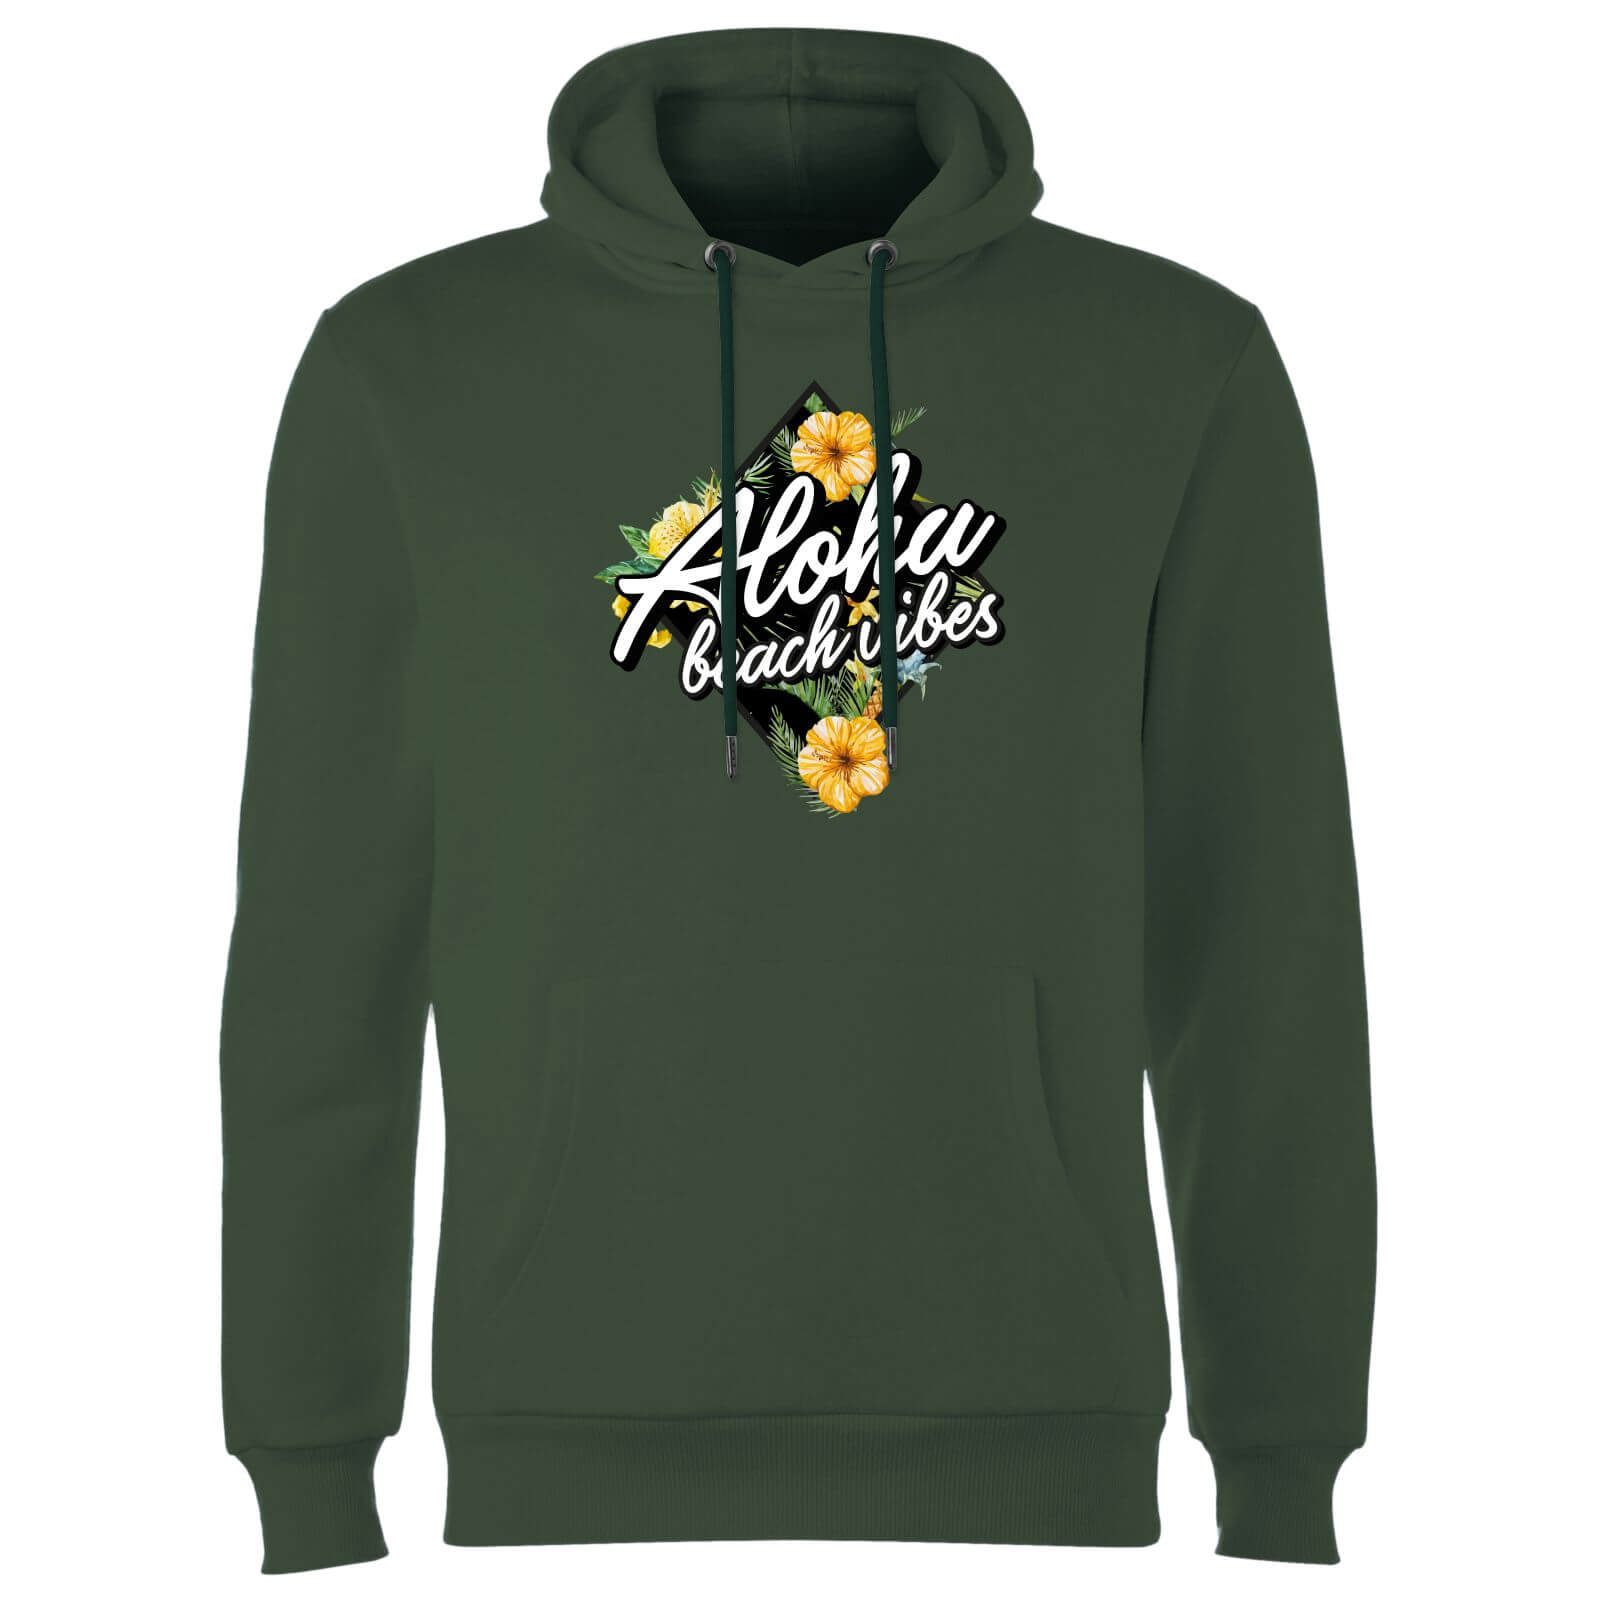 Aloha Beach Vibes Hoodie - Forest Green - S - Forest Green